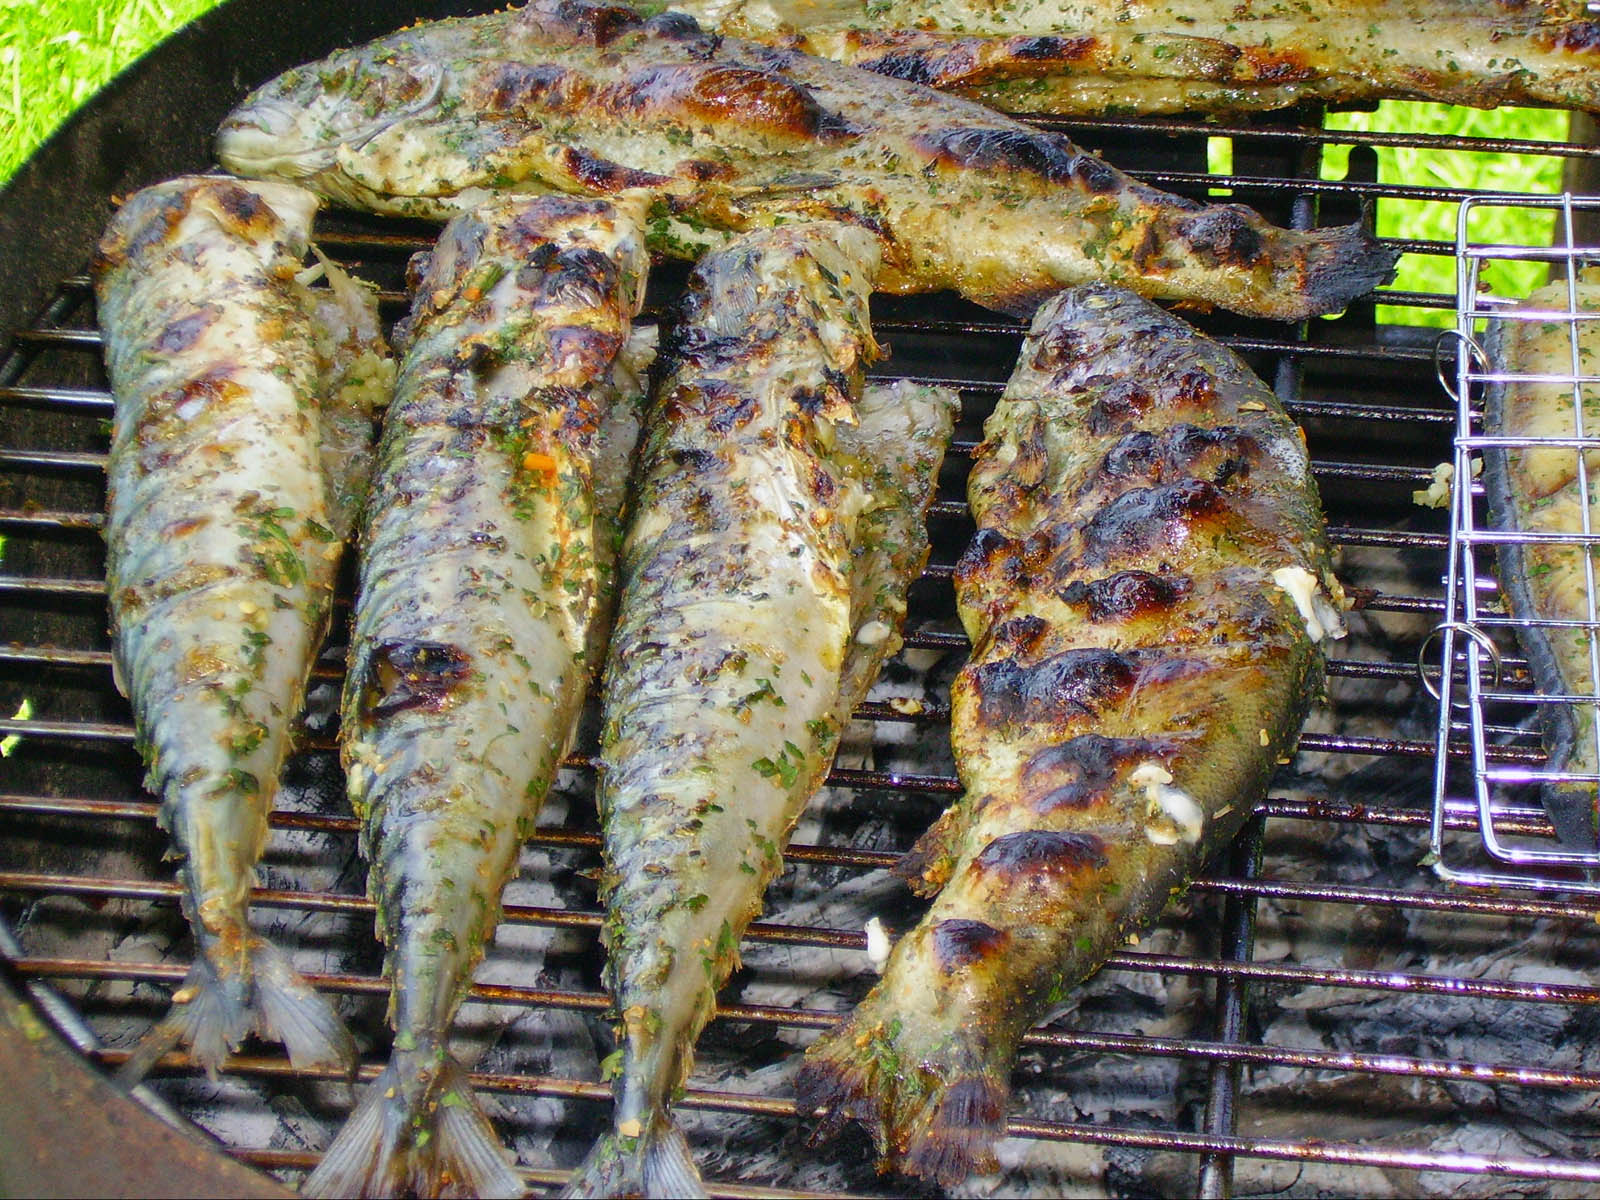 a large grill with grilled fish on it